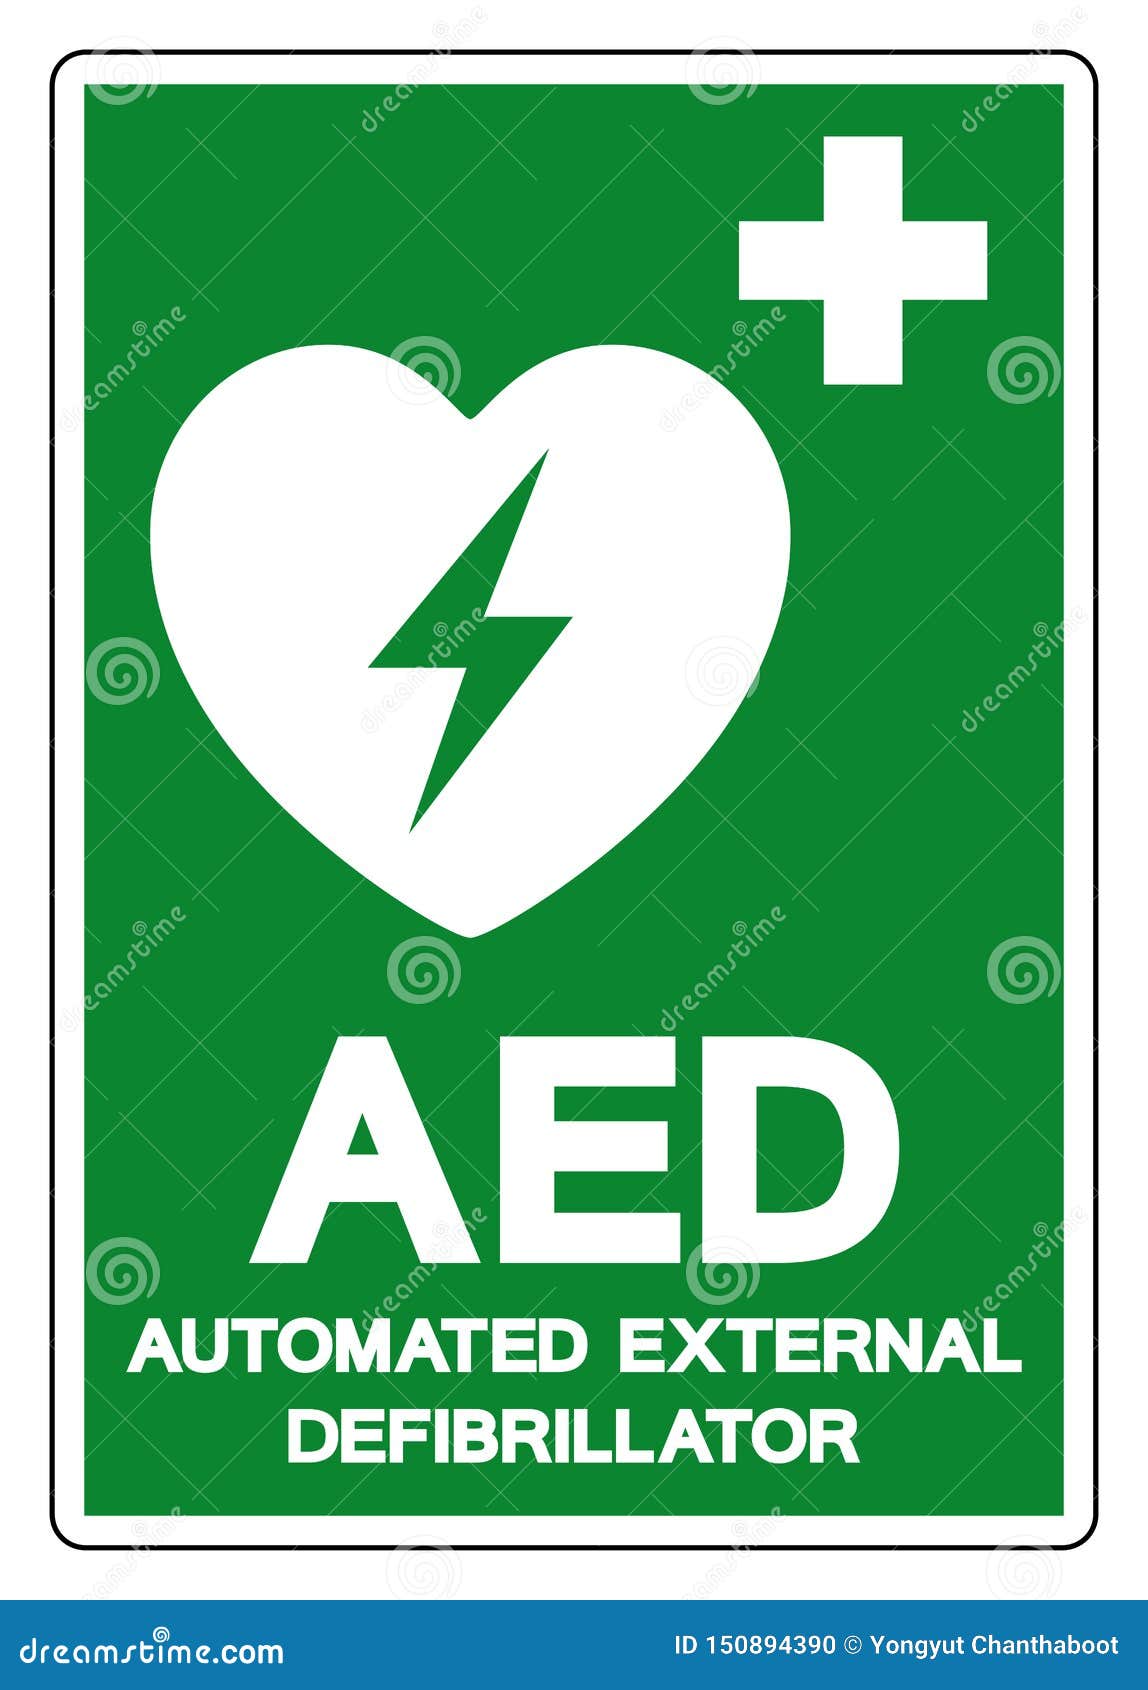 aed automated external defibrillator  sign,  , isolate on white background label .eps10